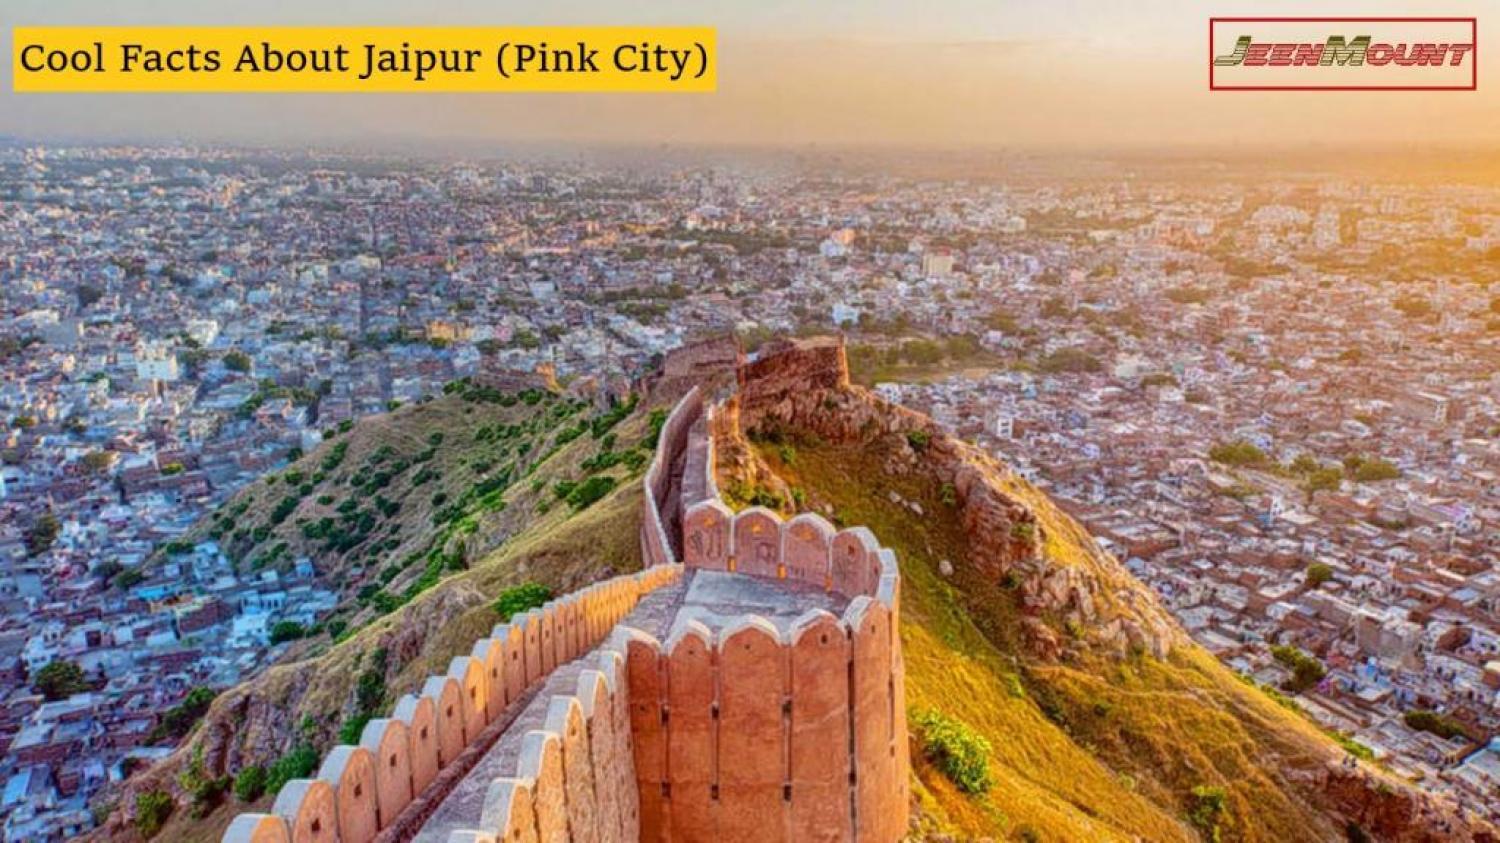 Cool Facts about the Jaipur